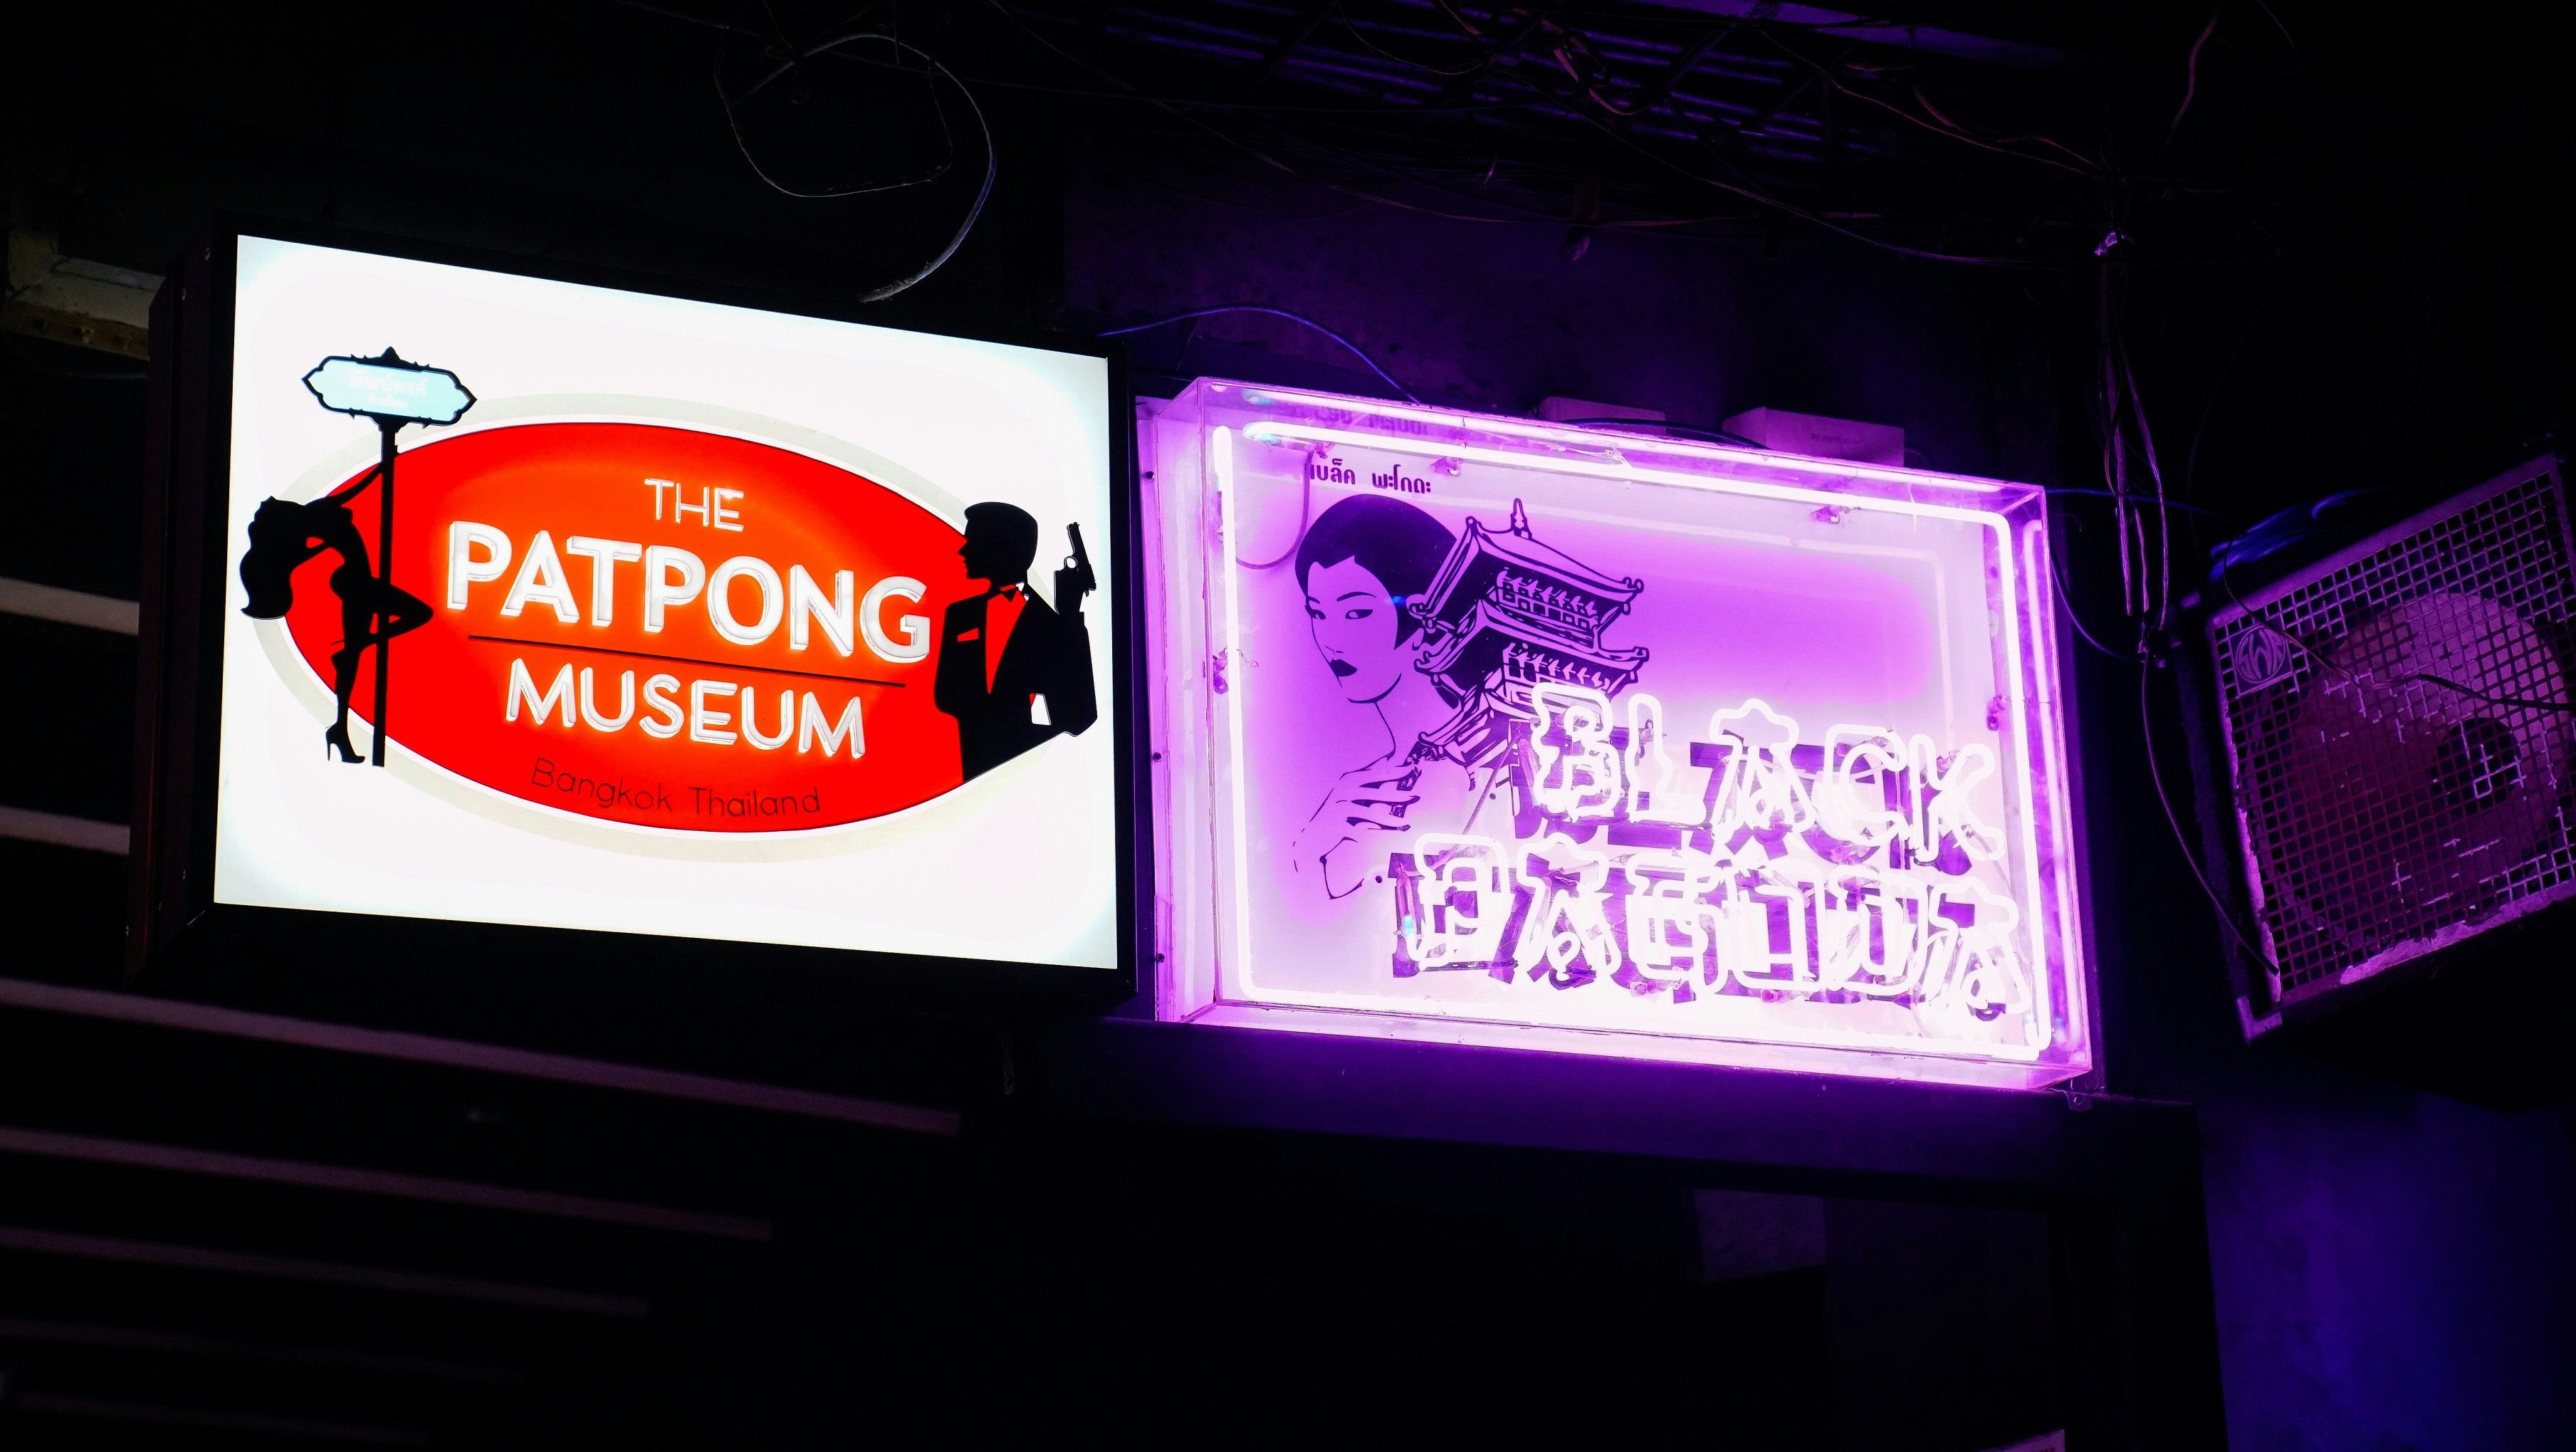 A view of the neon Patpong Museum sign, located on the street outside the museum. Next to it is a neon sign for the 'Black Pagoda'.